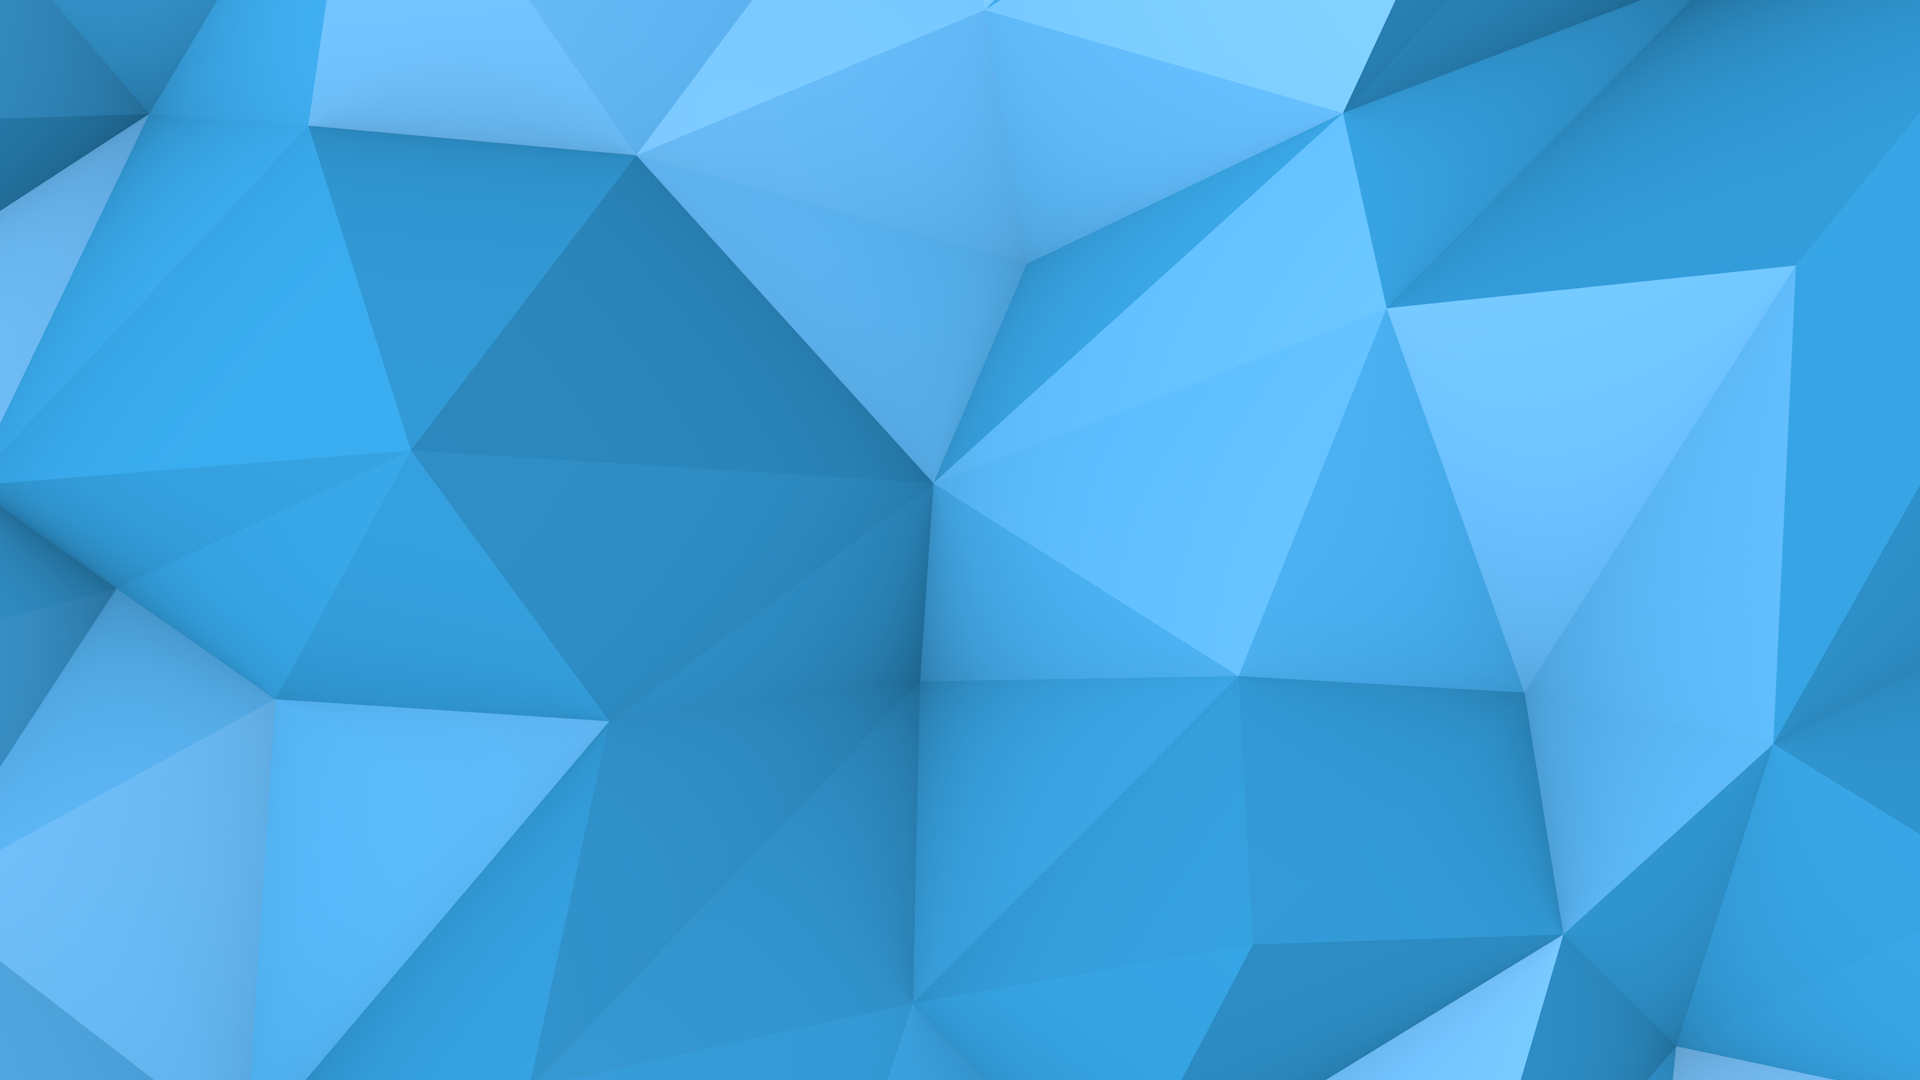 Abstract Polygons Wallpaper By Cratemuncher